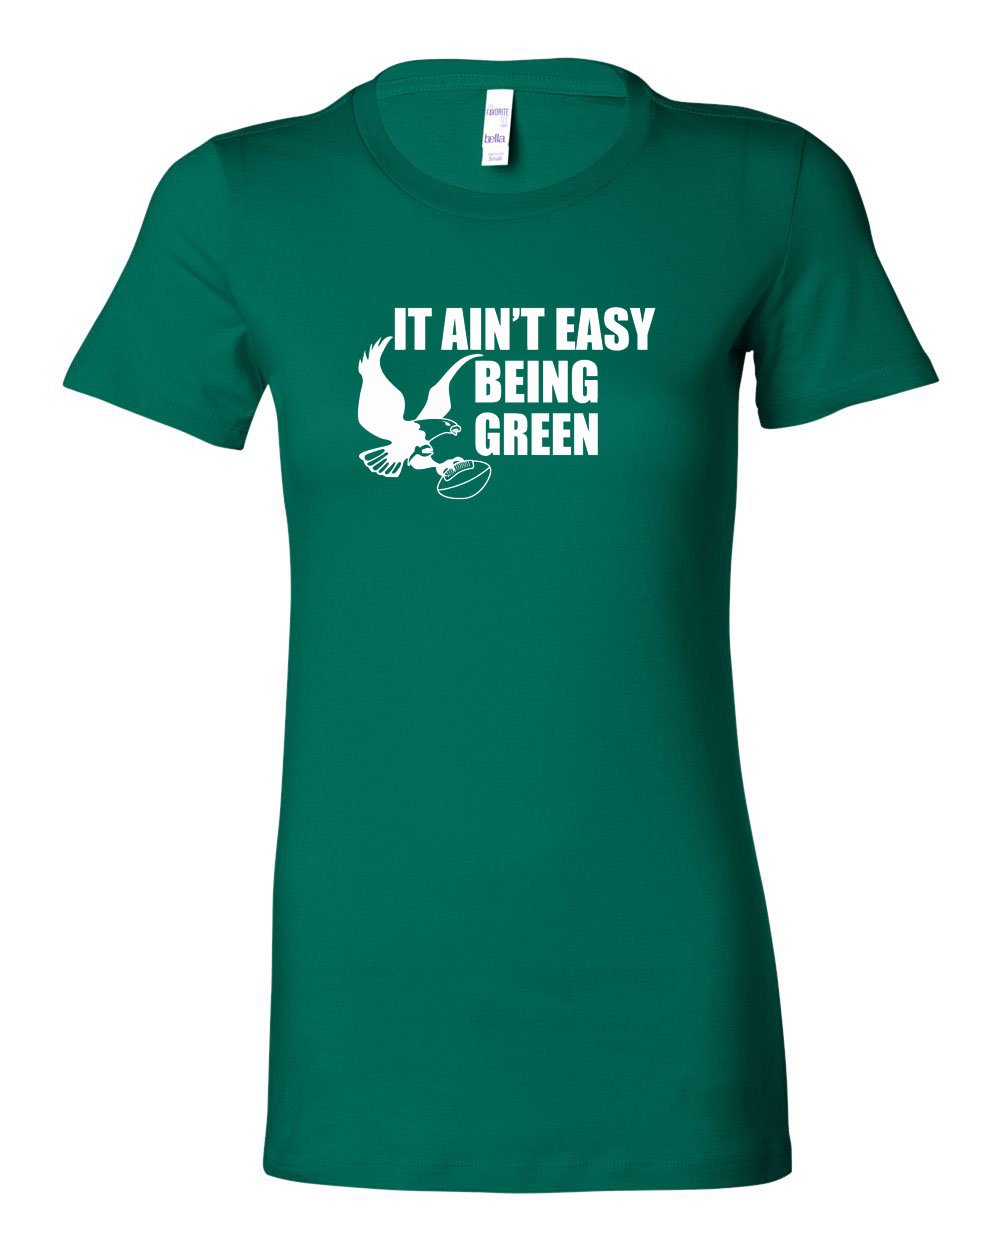 It Ain't Easy Being Green LADIES Junior-Fit T-Shirt